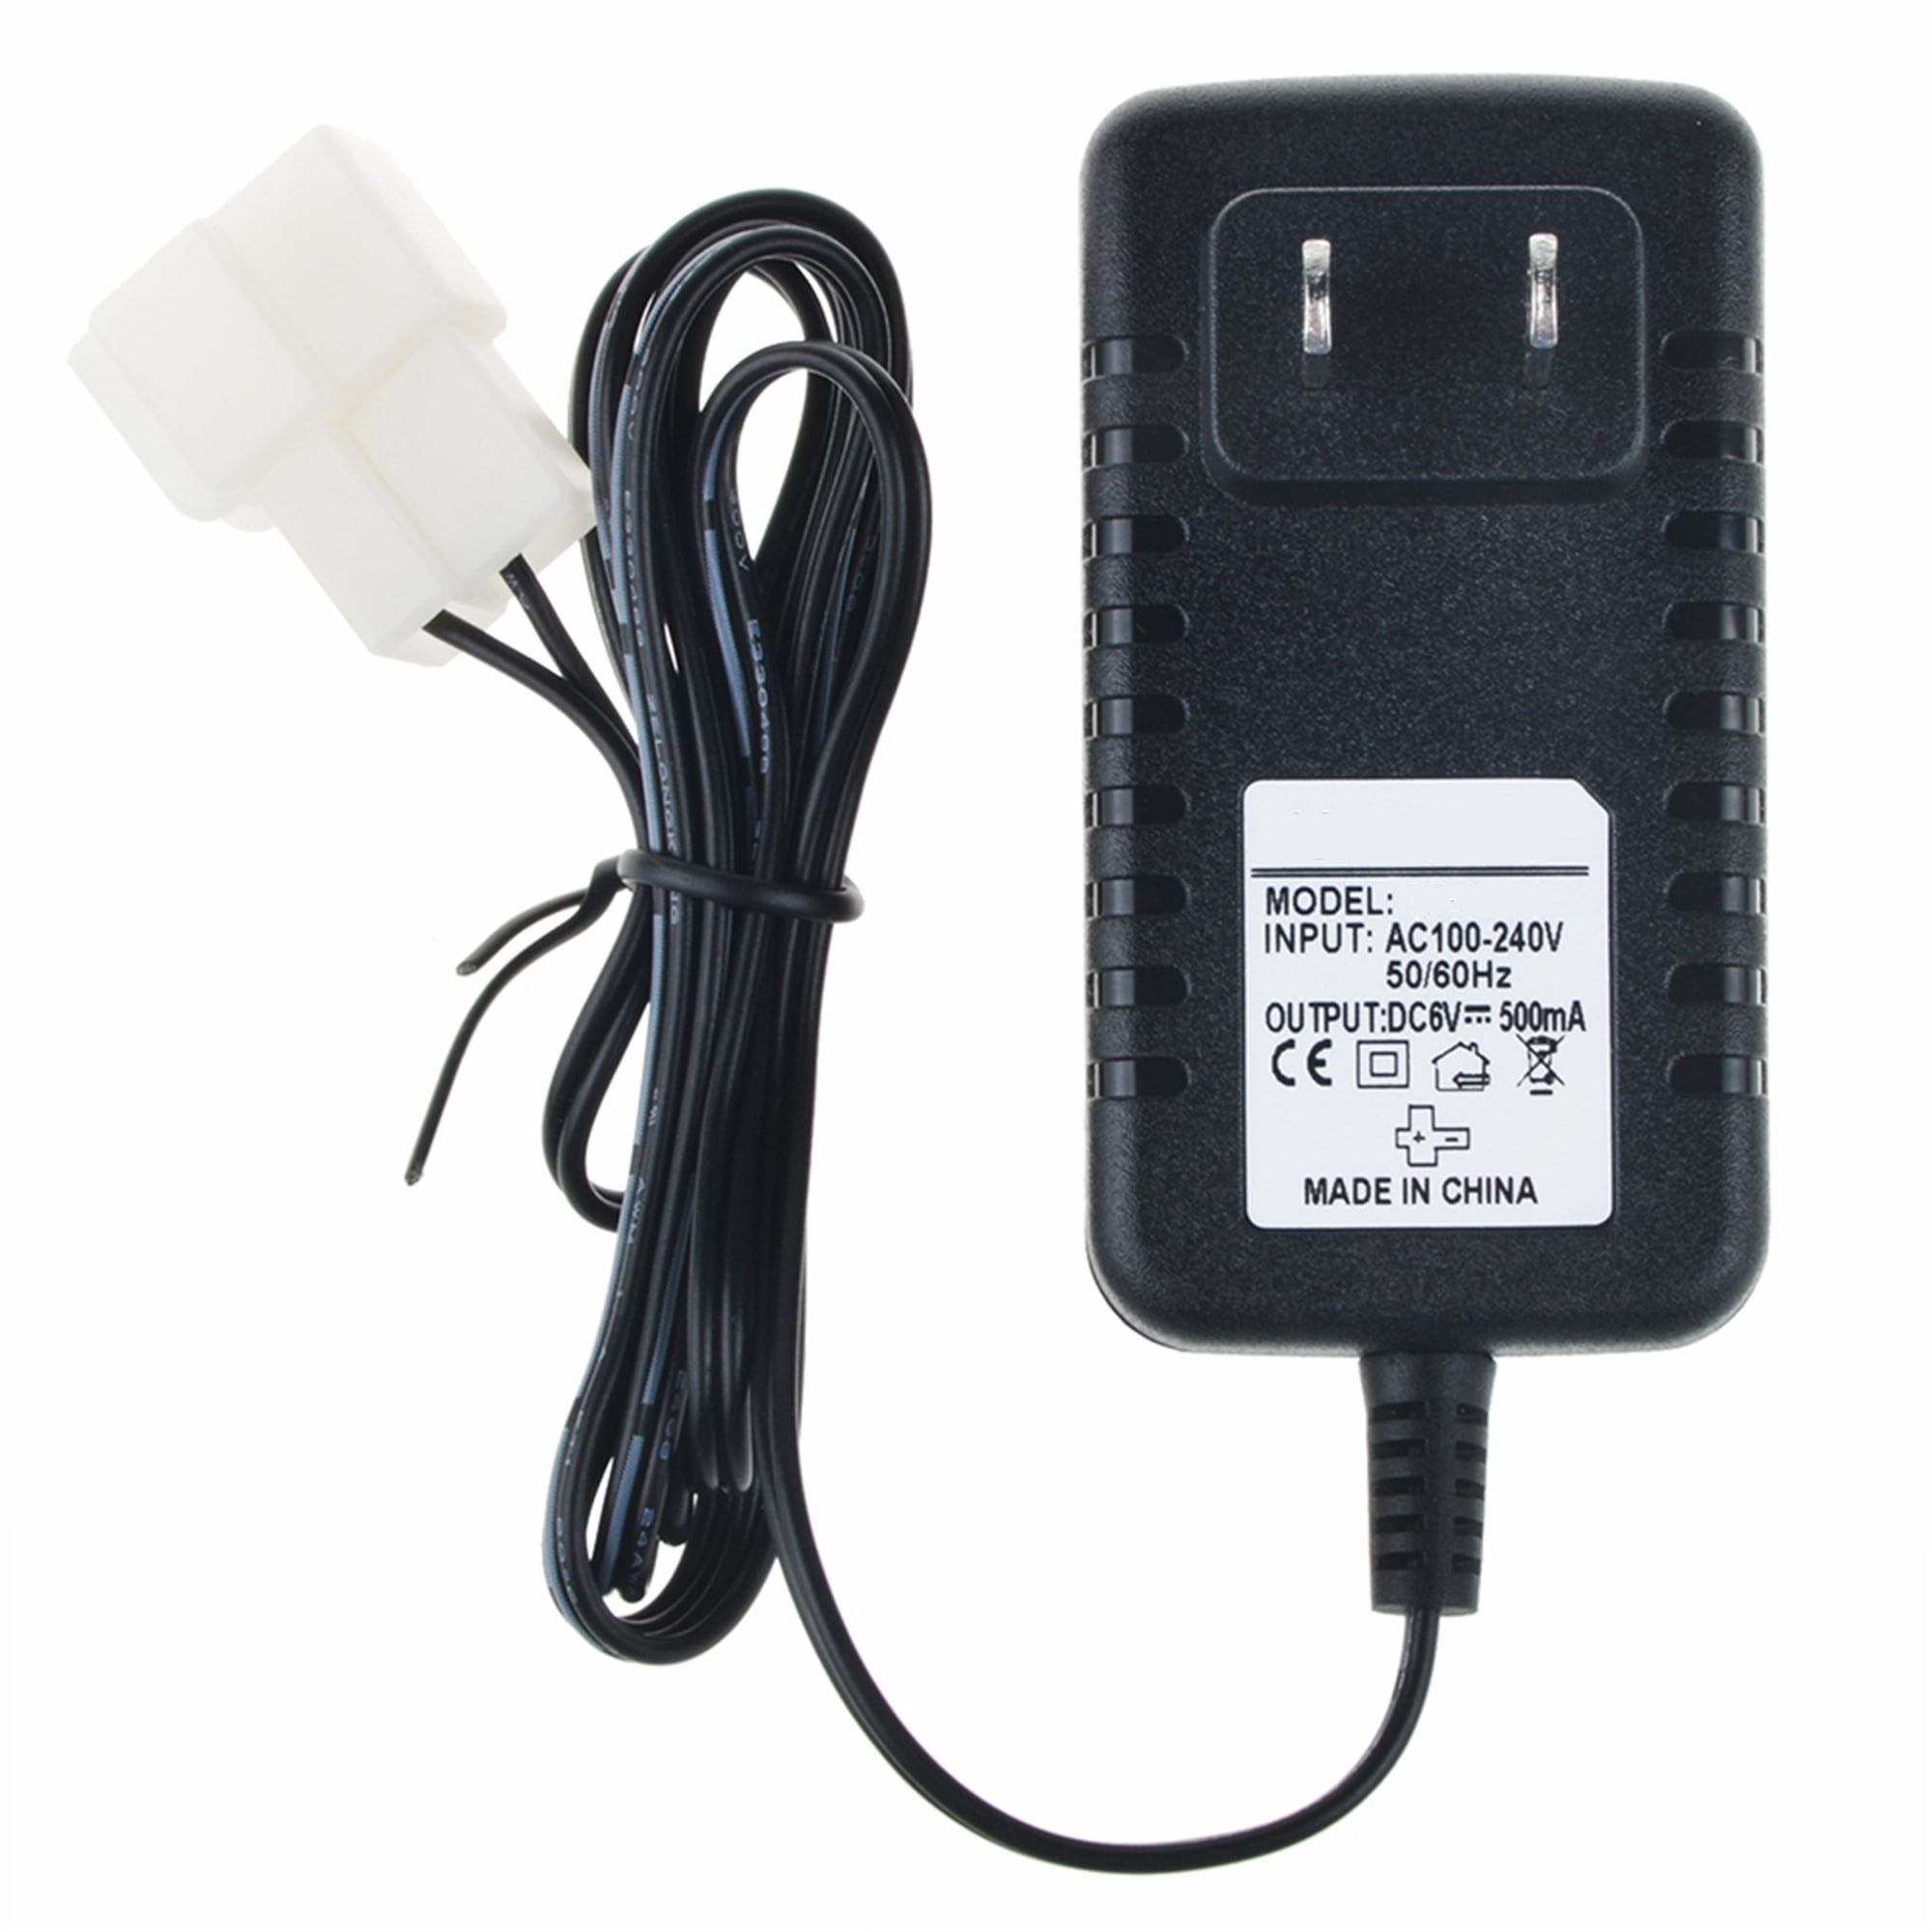 Power DC Charger Adapter for 5F60E99 ROLLPLAY AVIGO BMW X5 Ride ON 6VOLT Battery 